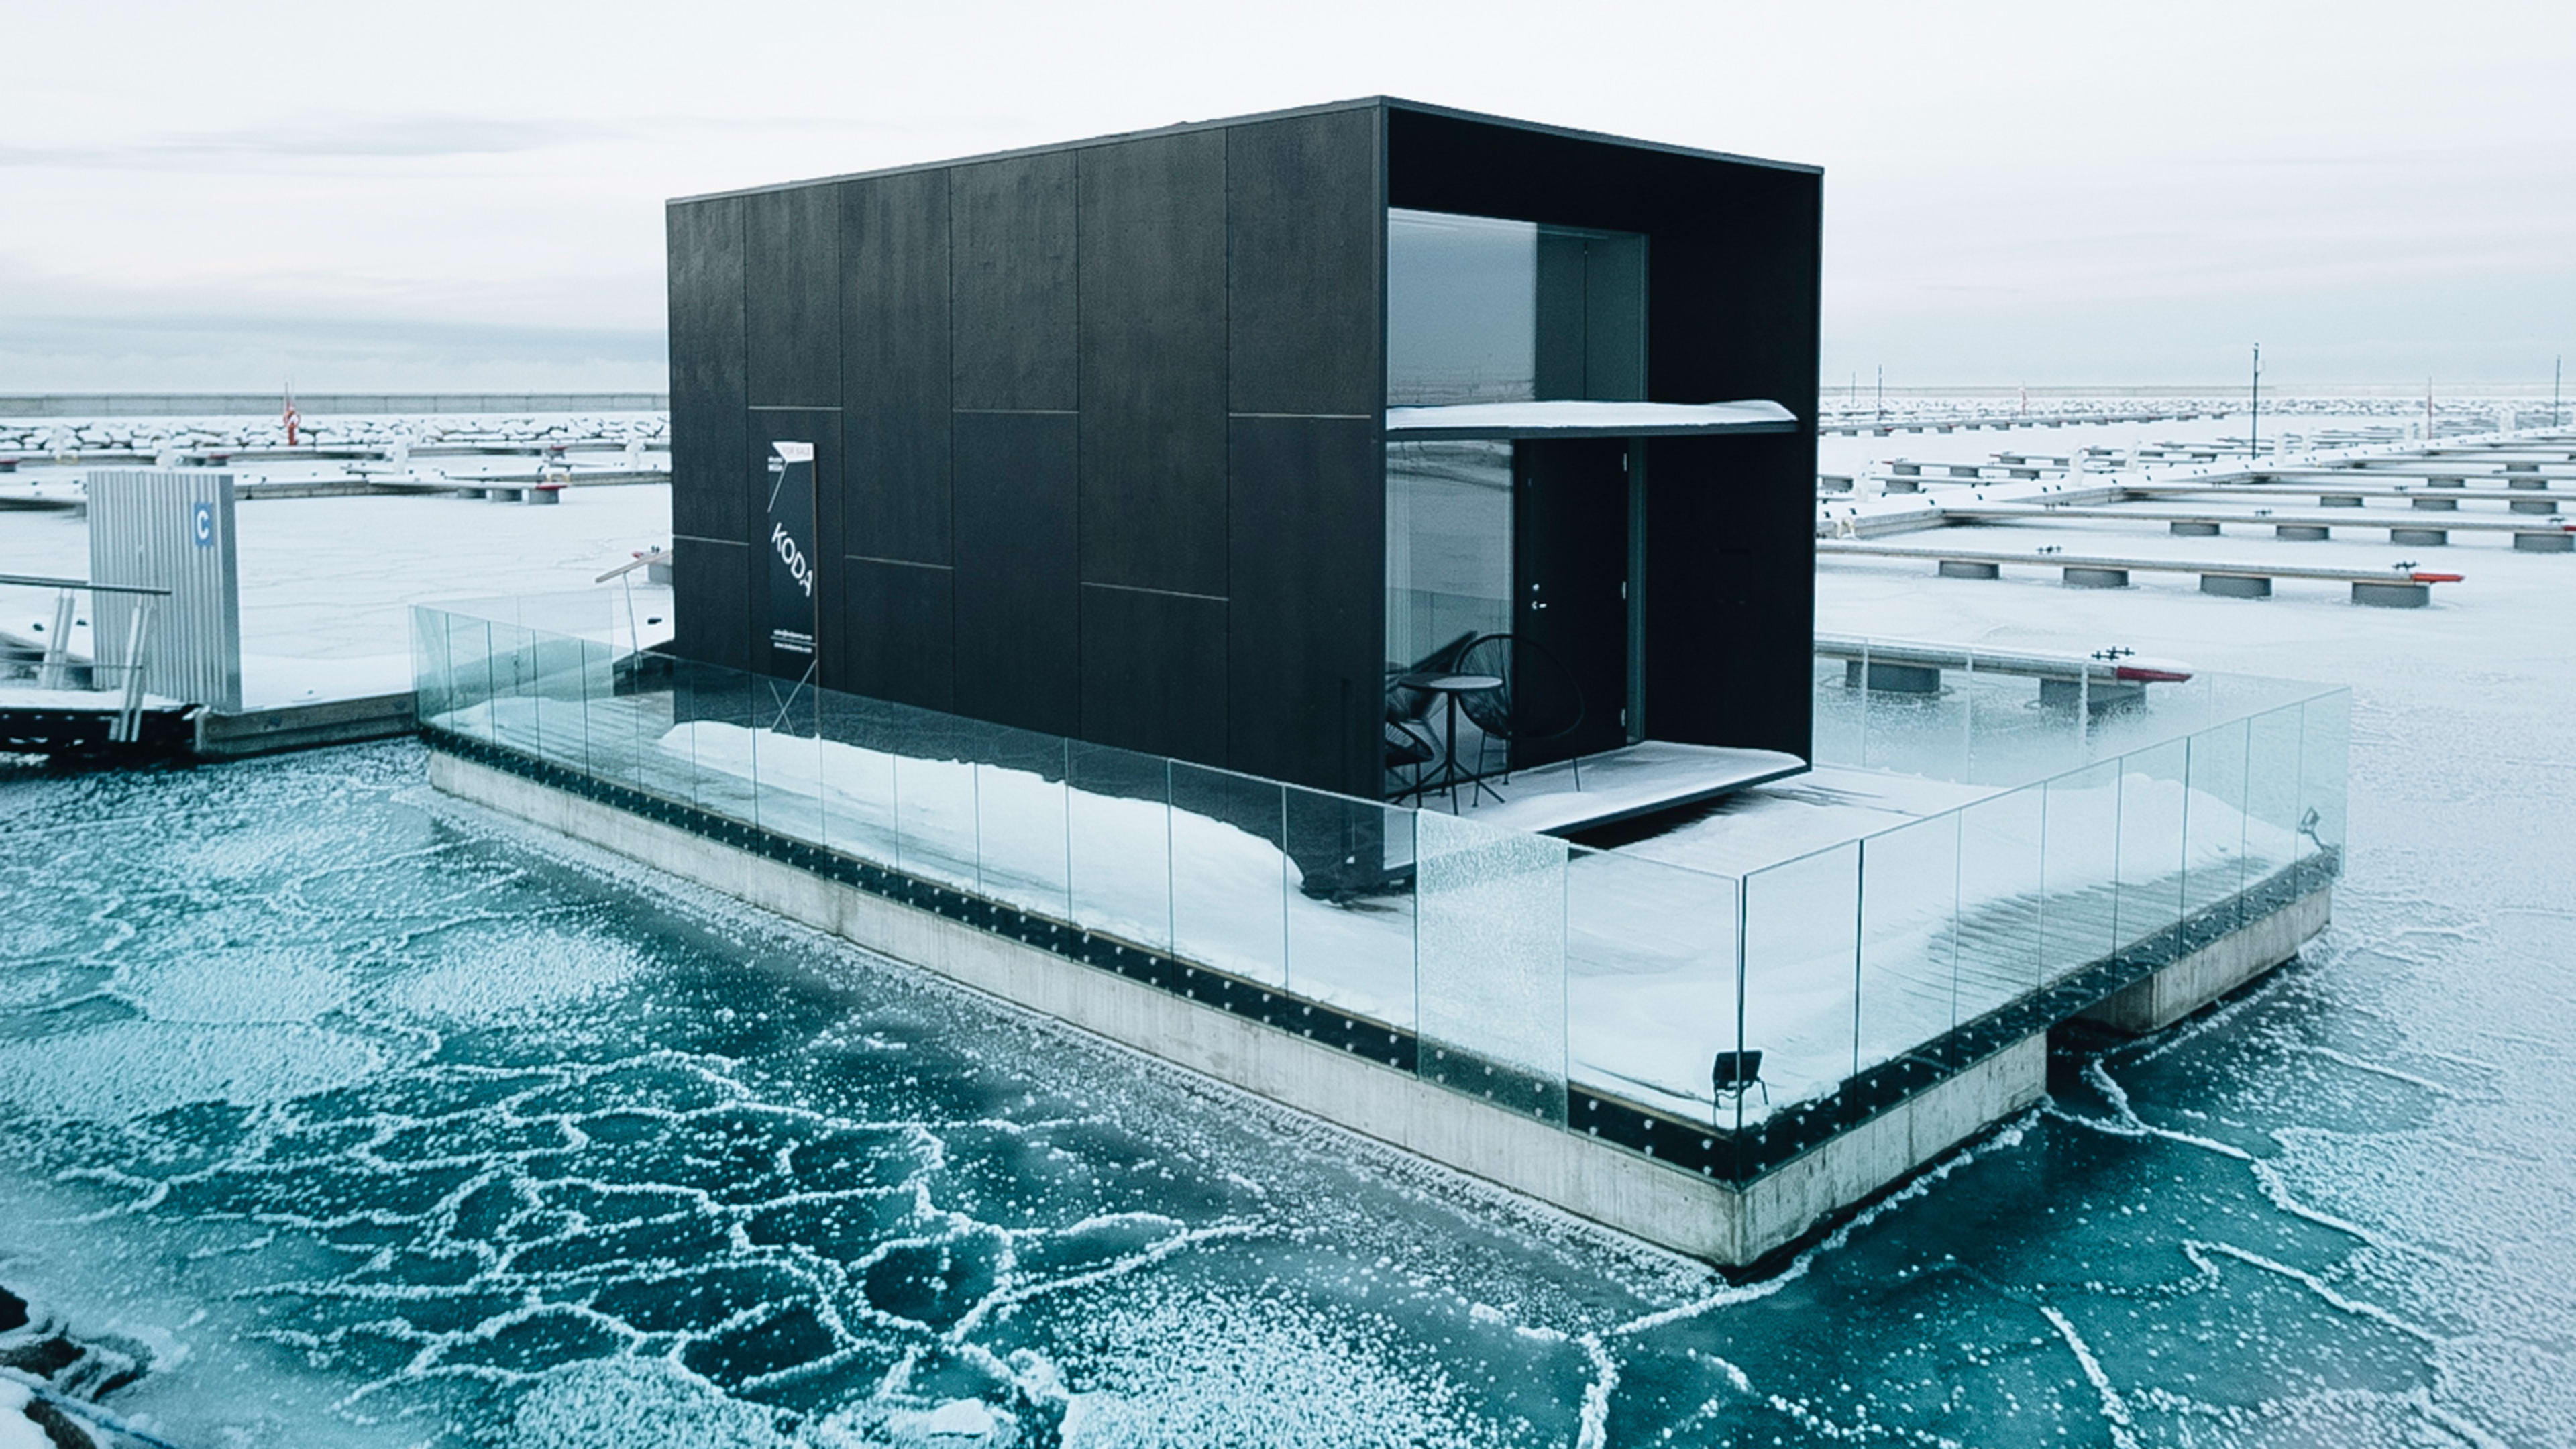 This floating house is climate apocalypse-ready